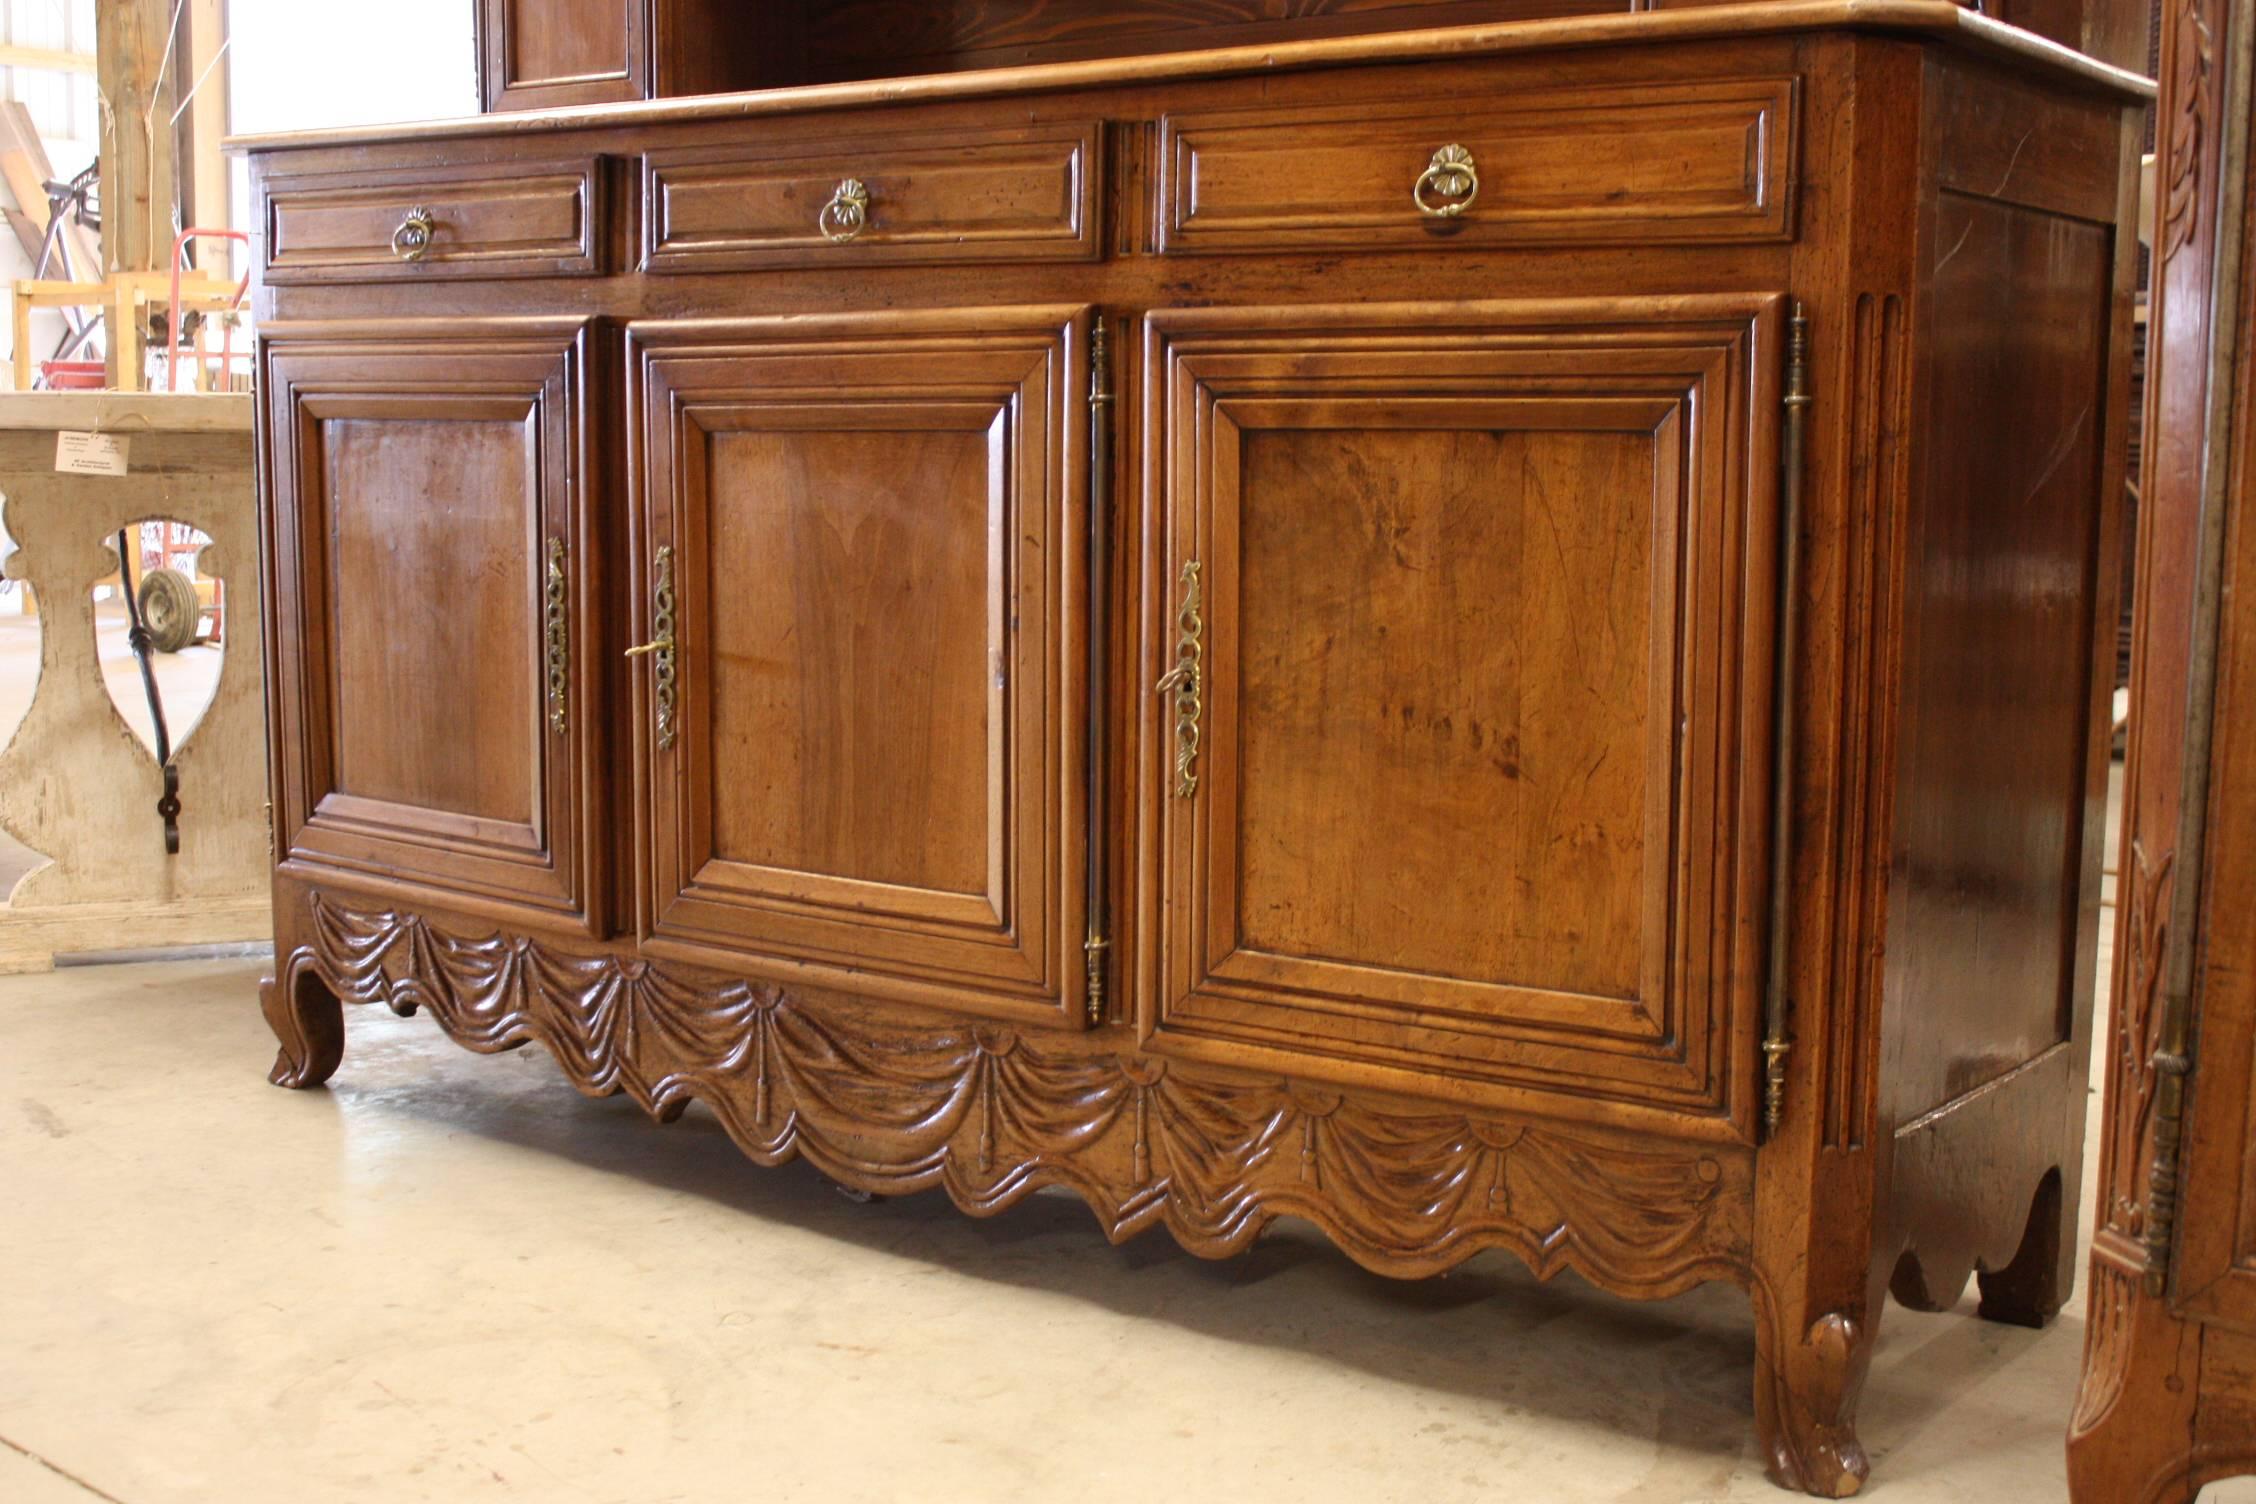 A fine Louis XV period vassellier in walnut with plate-rack, beautifully carved cornice and frieze, resting atop an Enfilade with three doors and three sliding drawers.